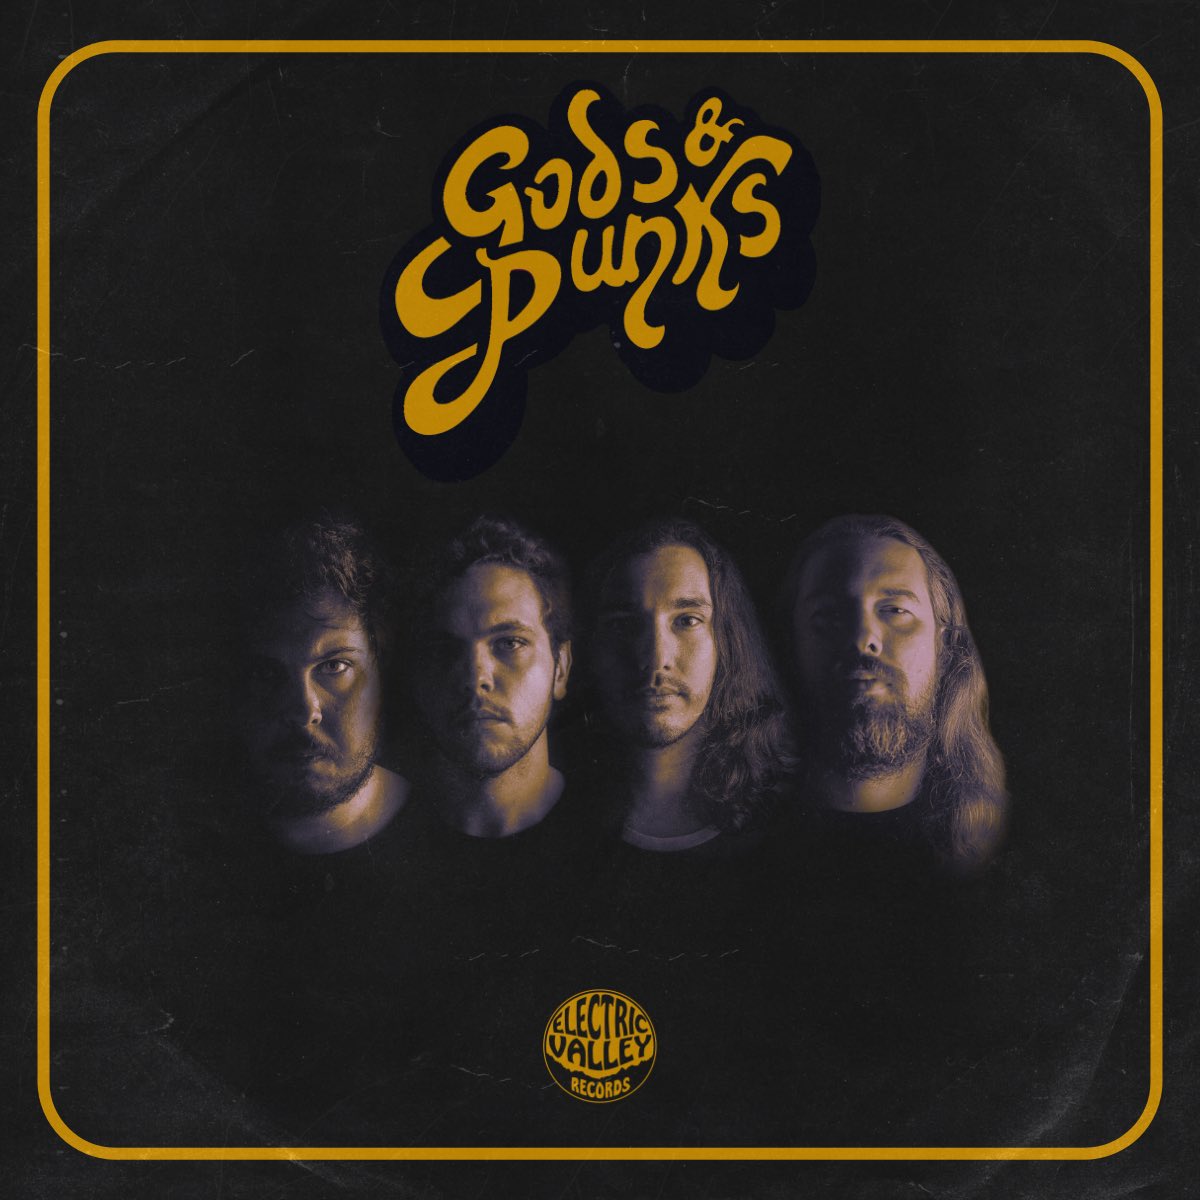 Electric Valley Records is proud to announce that heavy psych band Gods & Punks have just signed for their brand new album🔥
•
#godsandpunks #stoner #stonerrock #desertrock #heavypsych #stonerdoom #heavyrock #newalbum #vinyl #lp #vinylrecords #heavyriffs #electricvalleyrecords